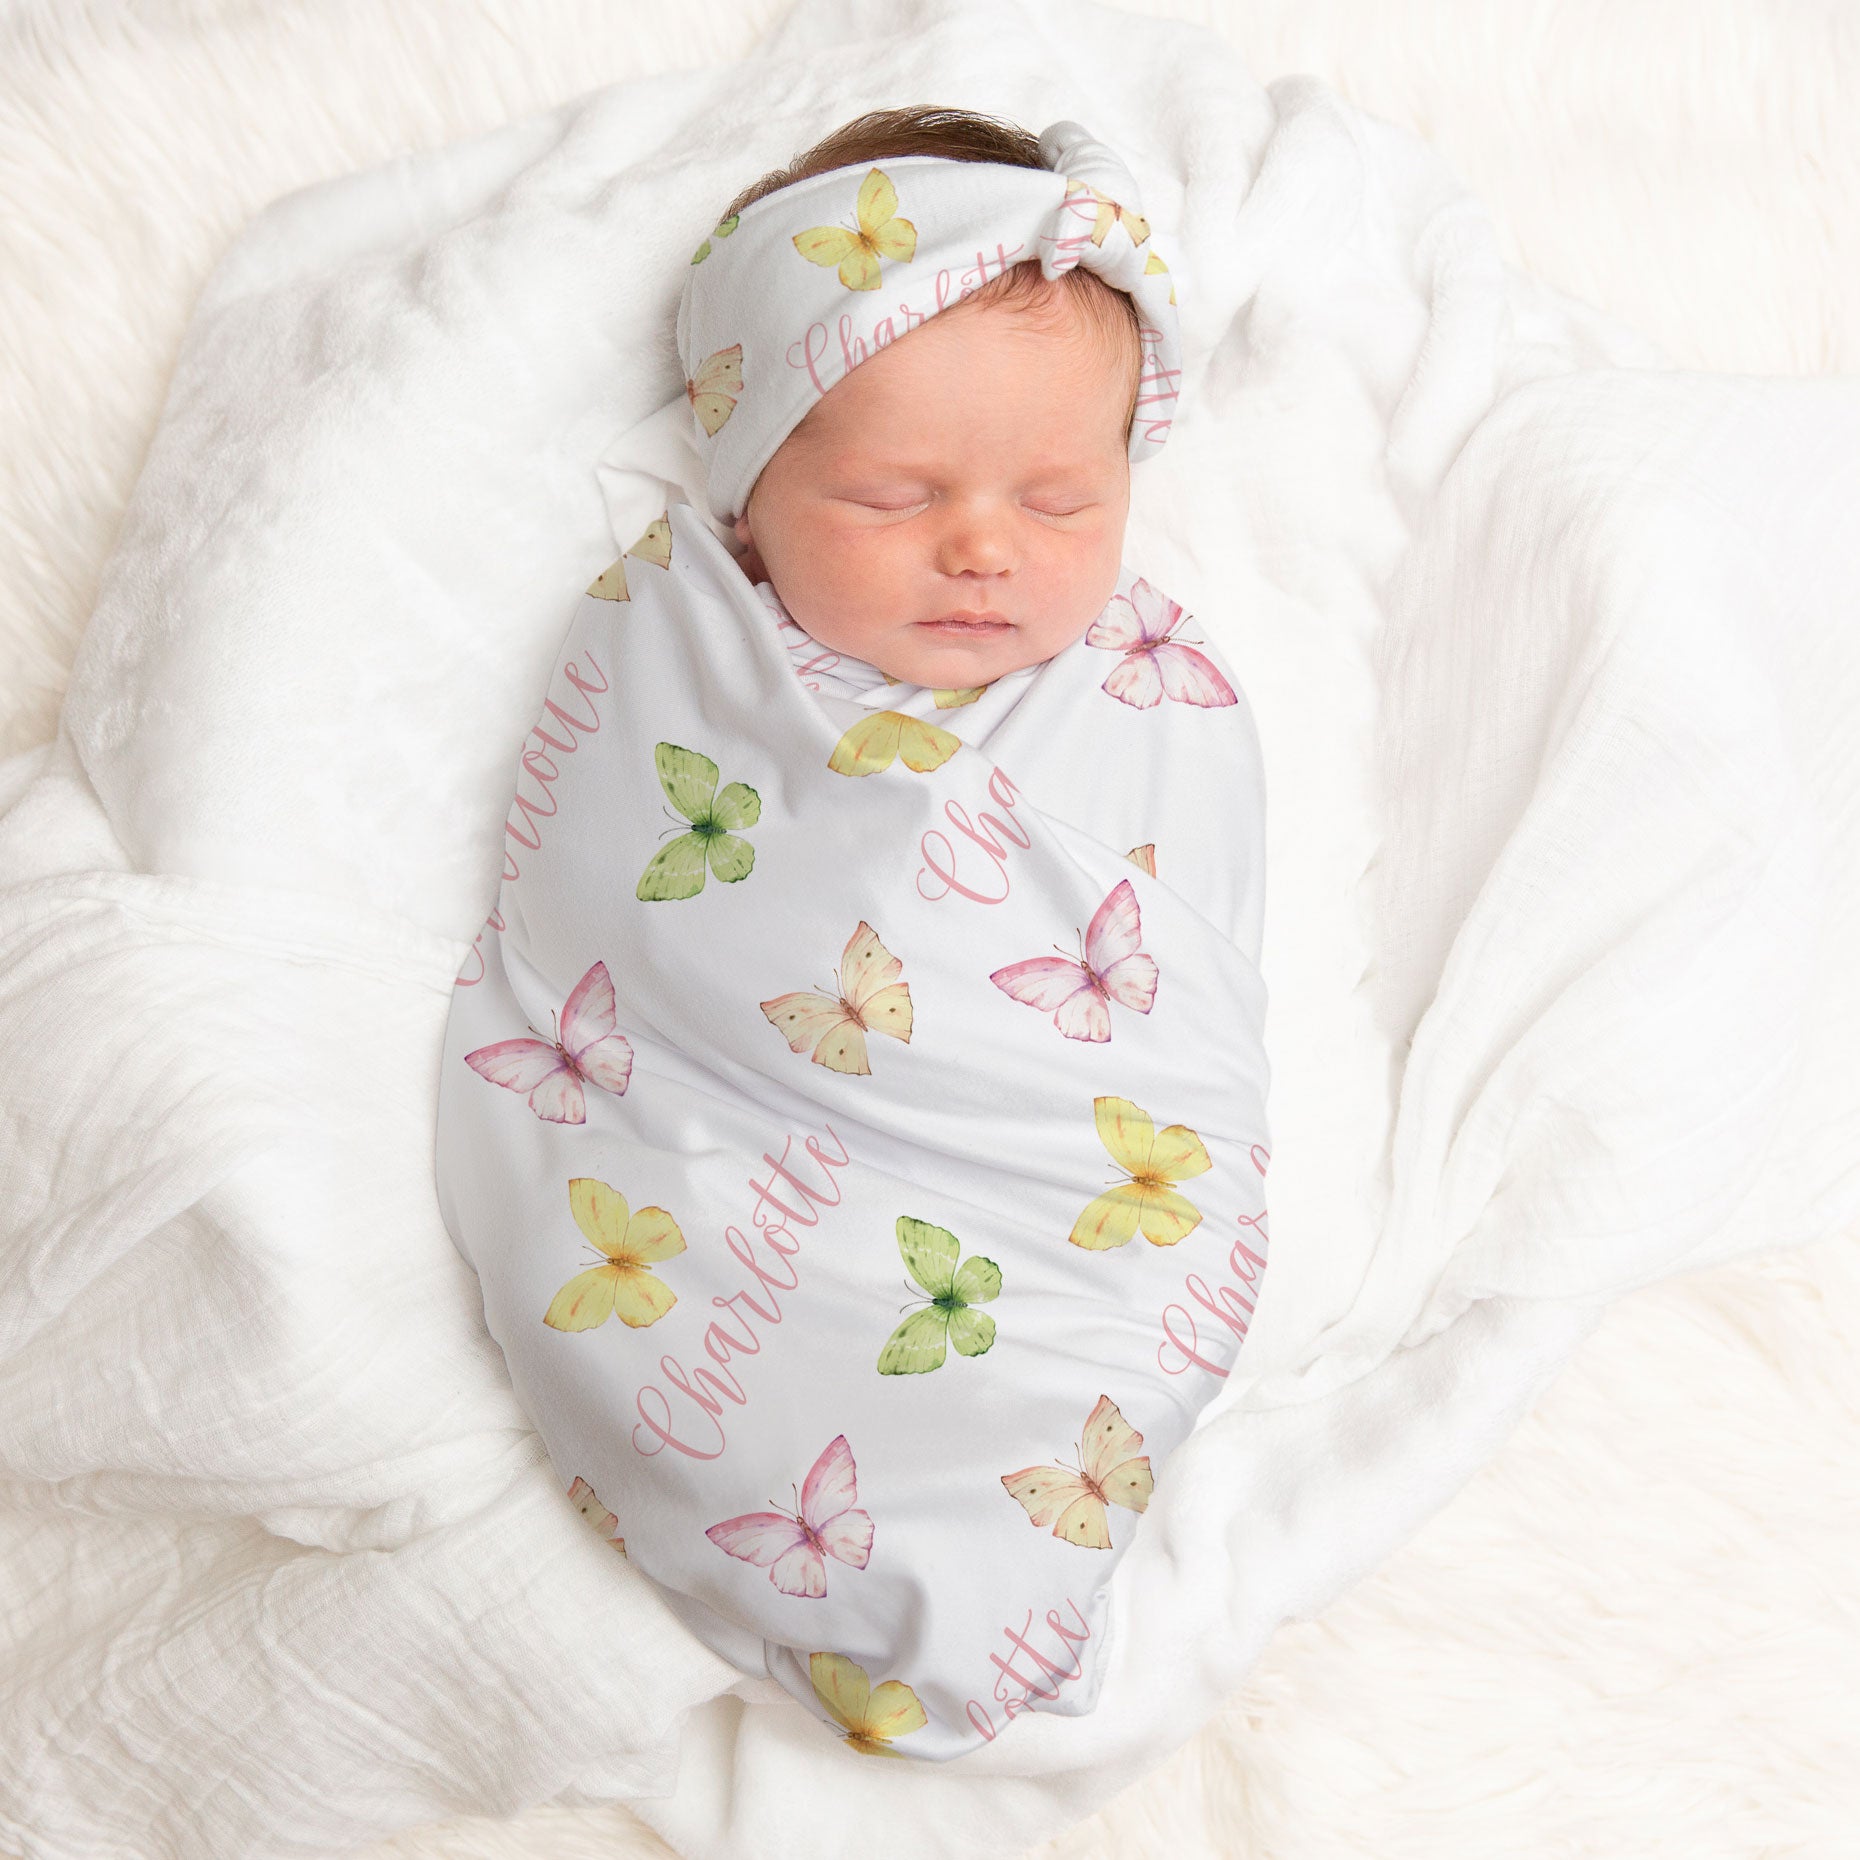 Girl swaddle blanket with matching headband, stretchy jersey knit